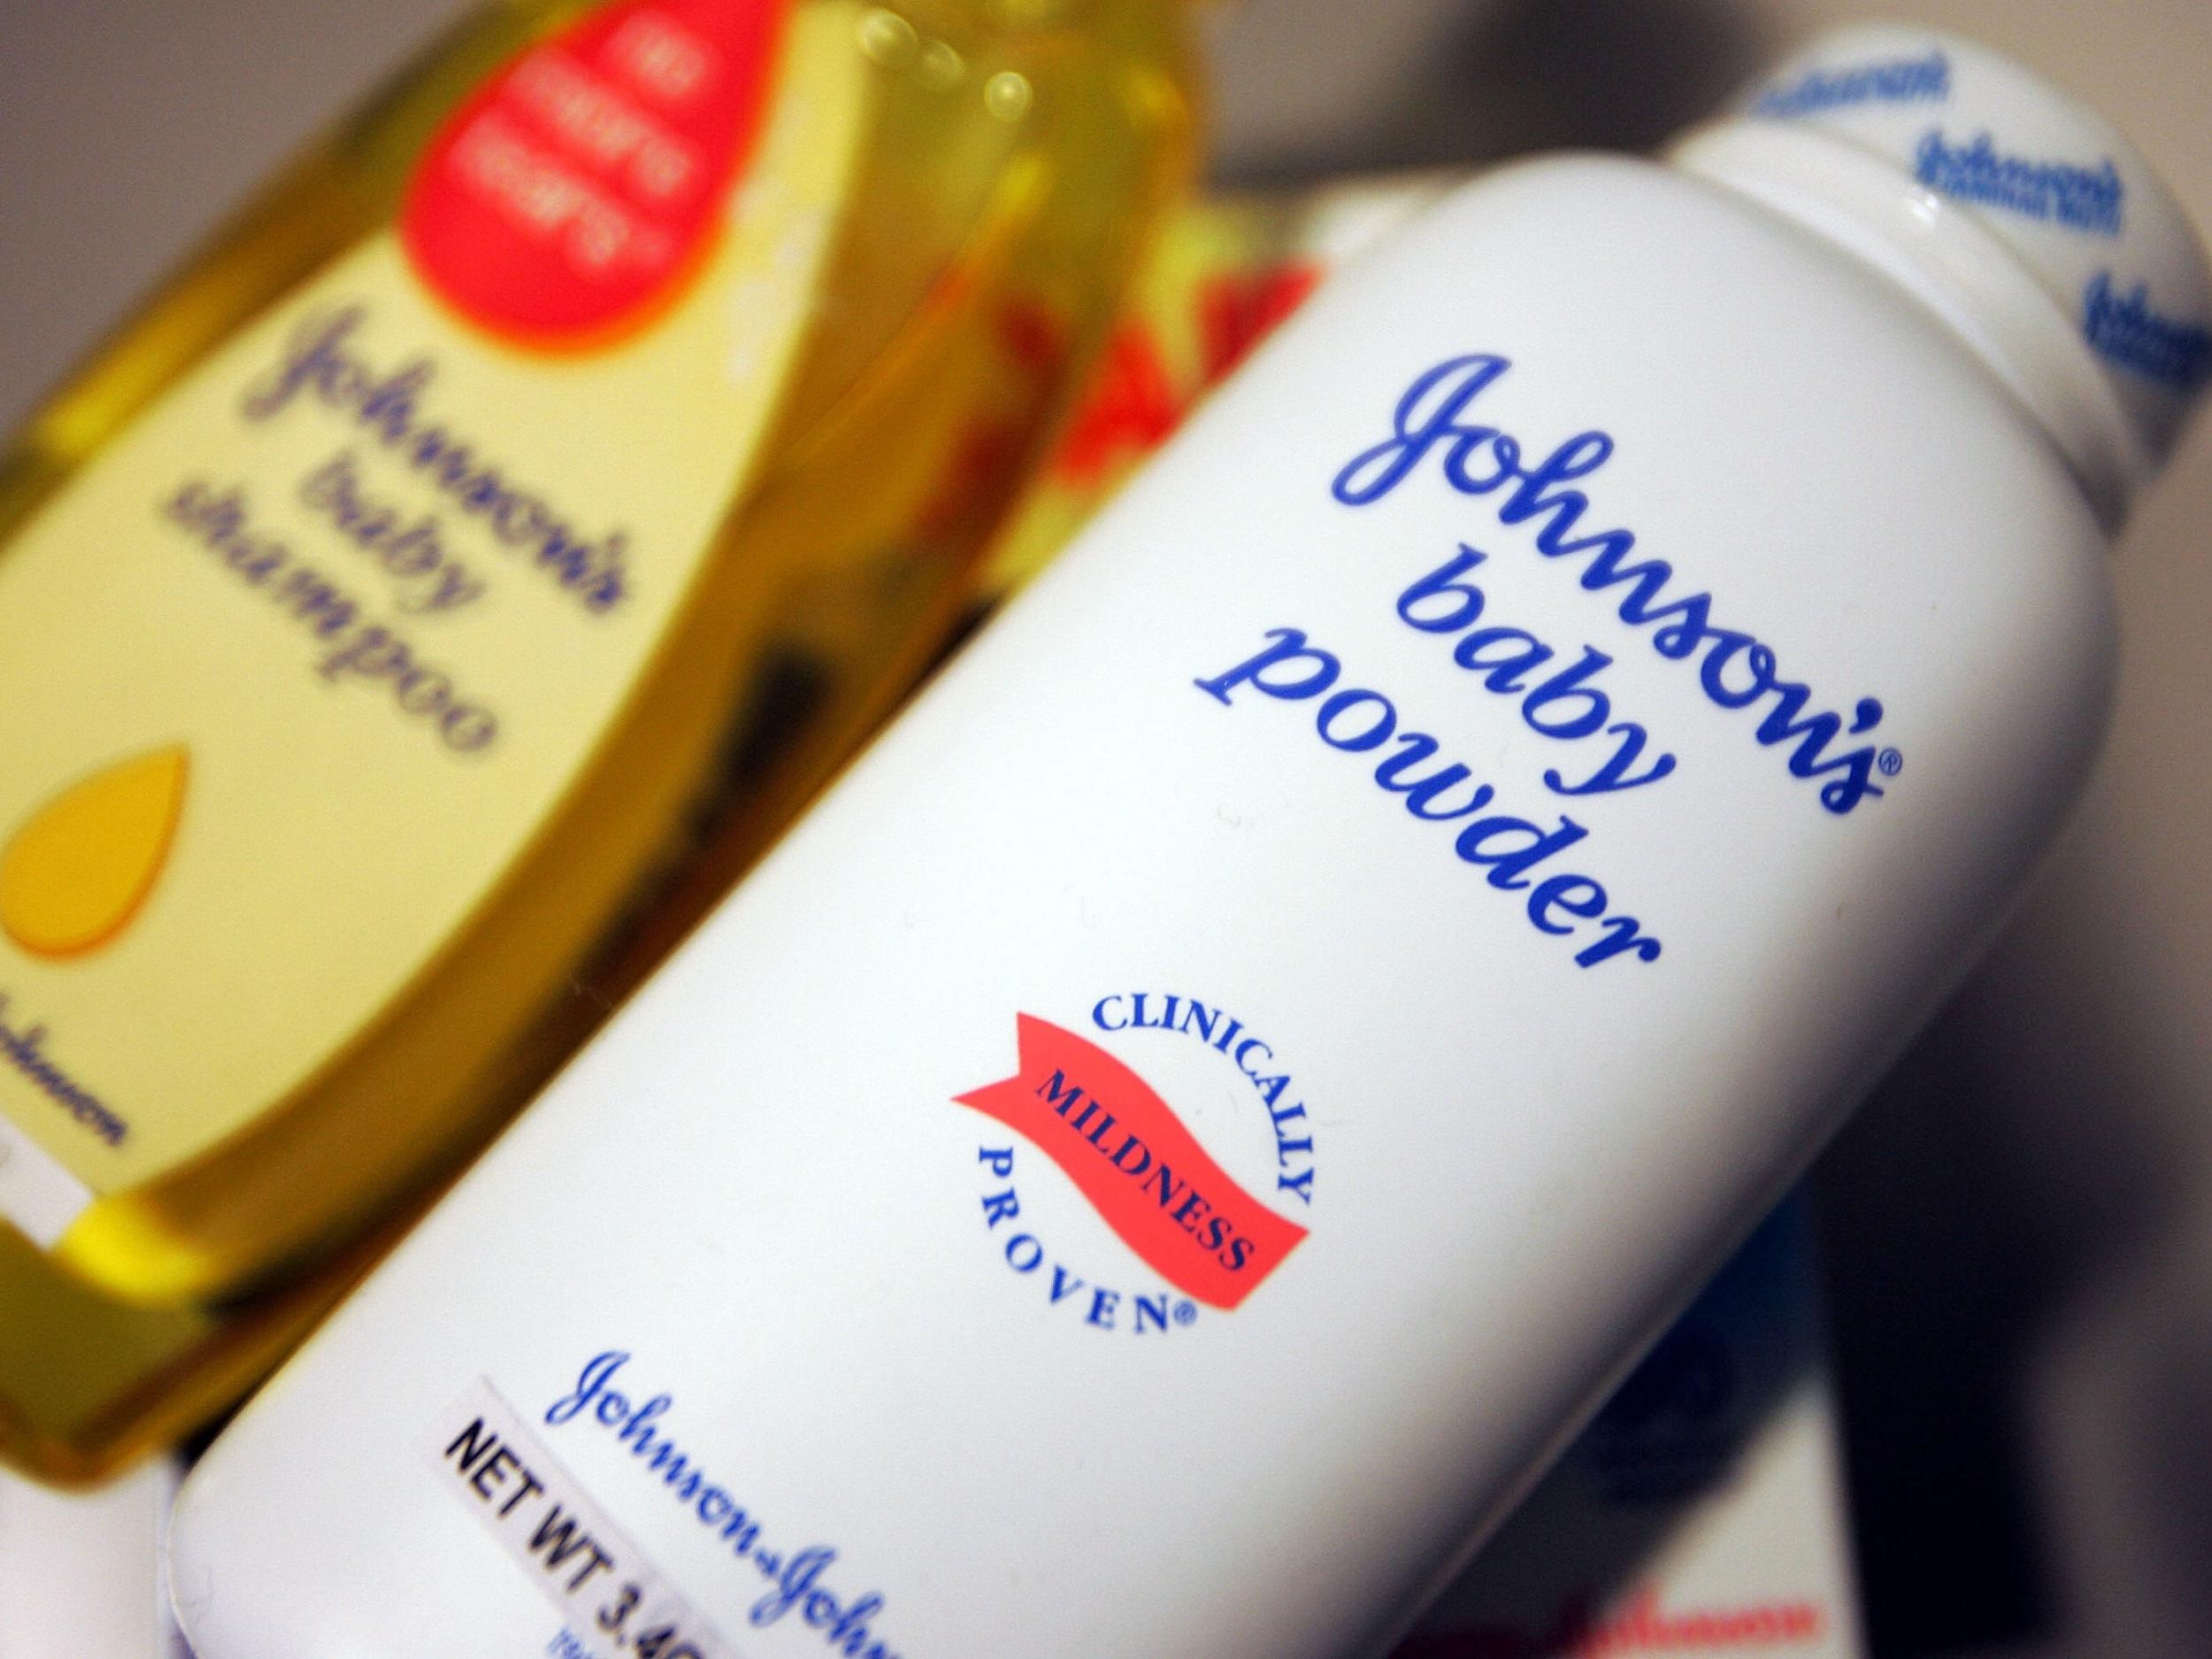 Johnson & Johnson Talc Powder Products and Cancer – Are You at Risk?